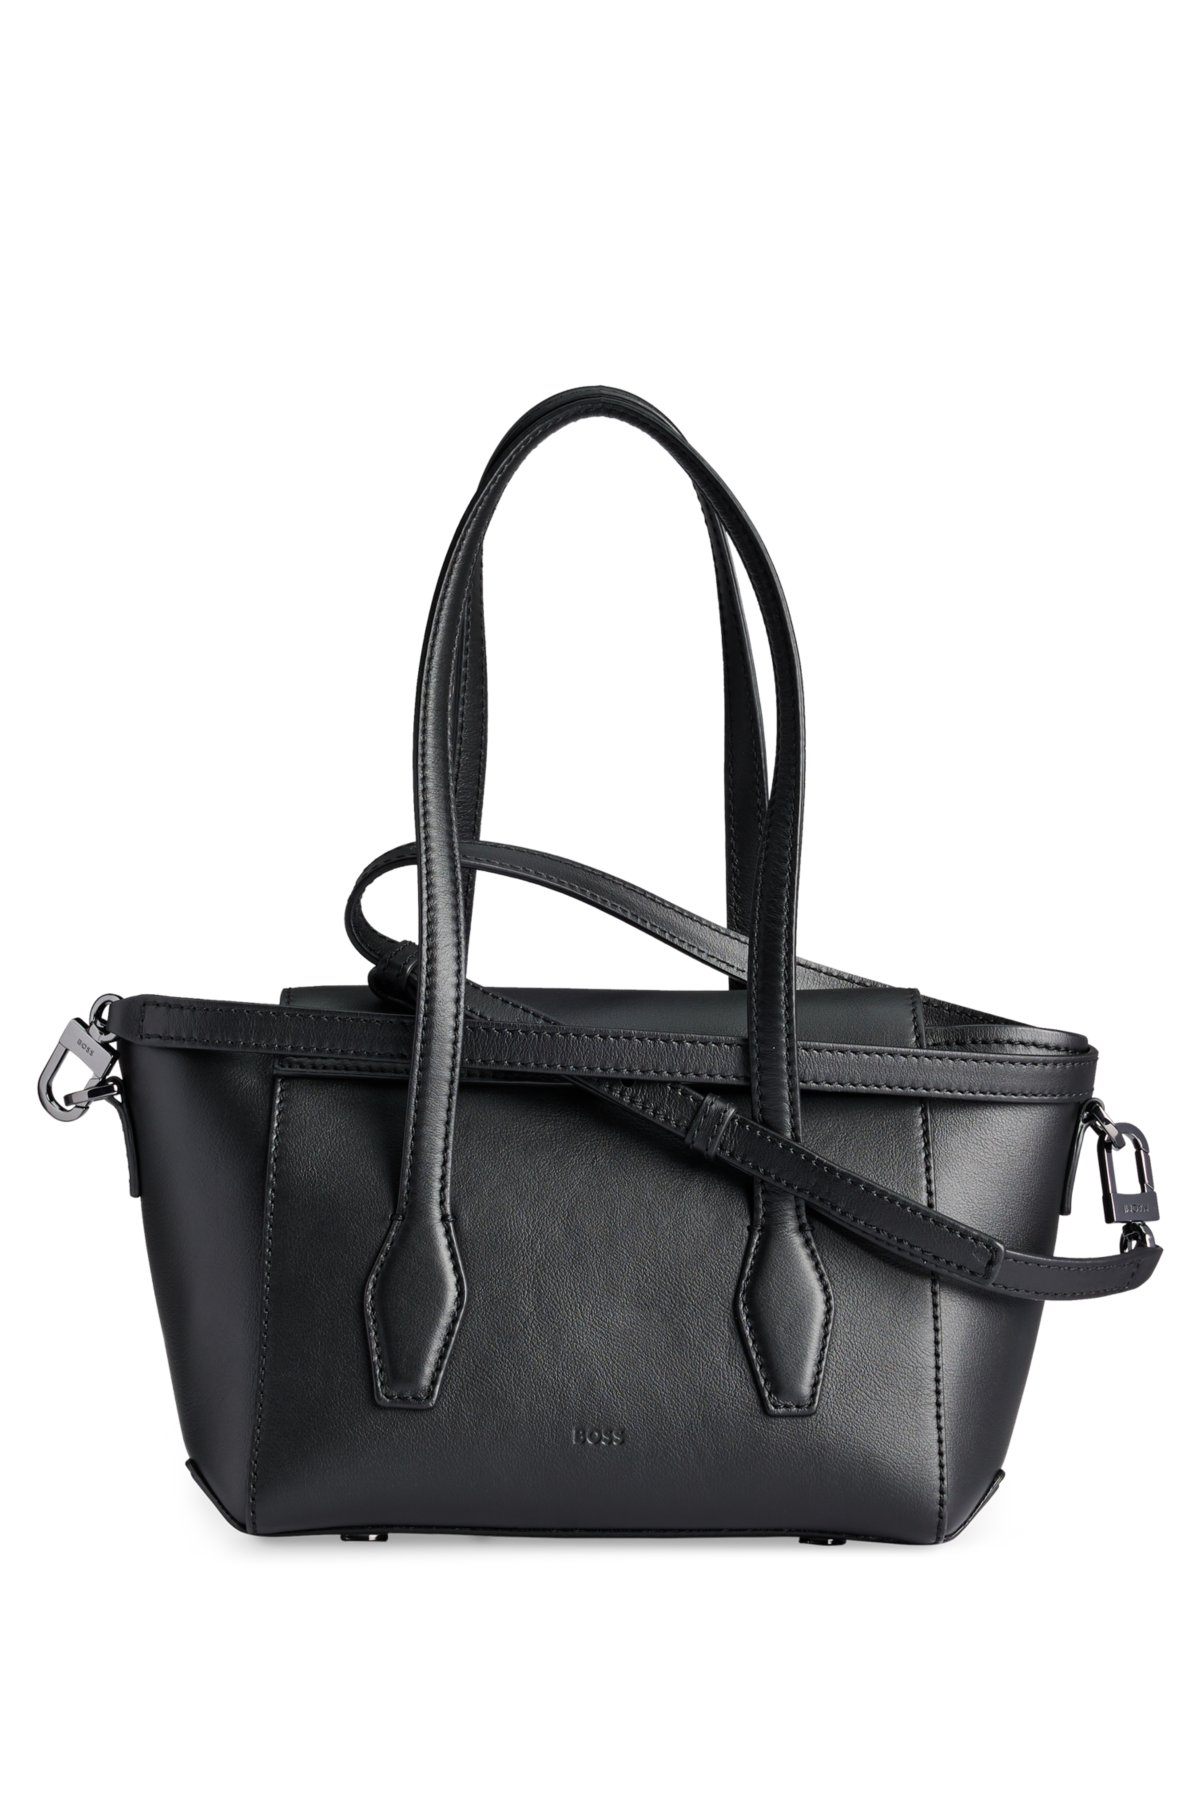 NAOMI x BOSS leather tote bag with branded trims, Black